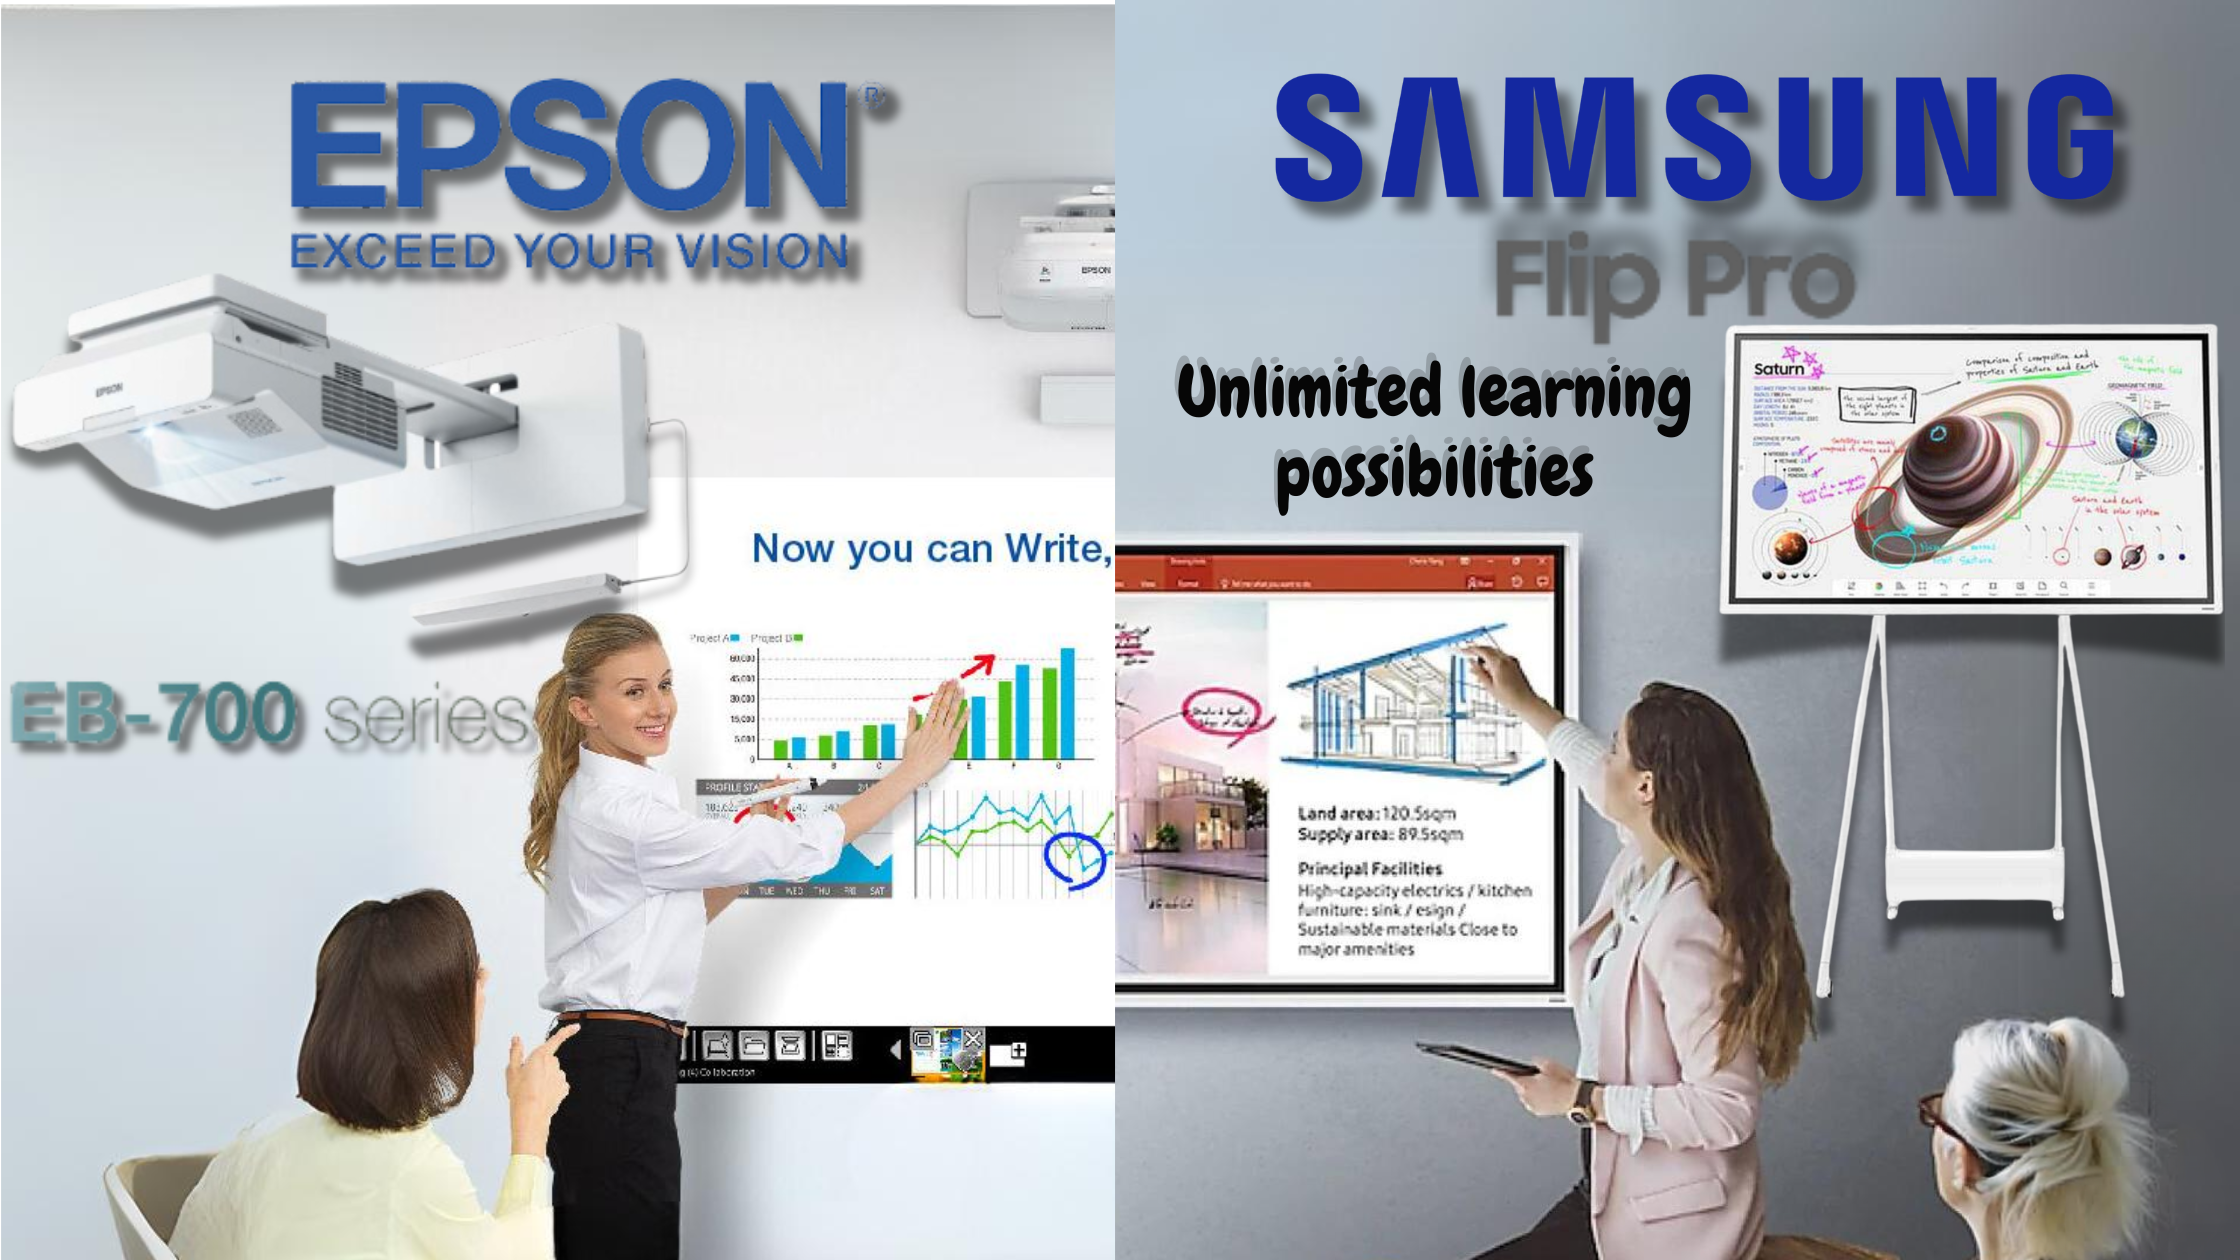 Empowering Engagement: Epson BrightLink 700 vs. Samsung Flip Pro - Matching Interactive Solutions to Your Environment